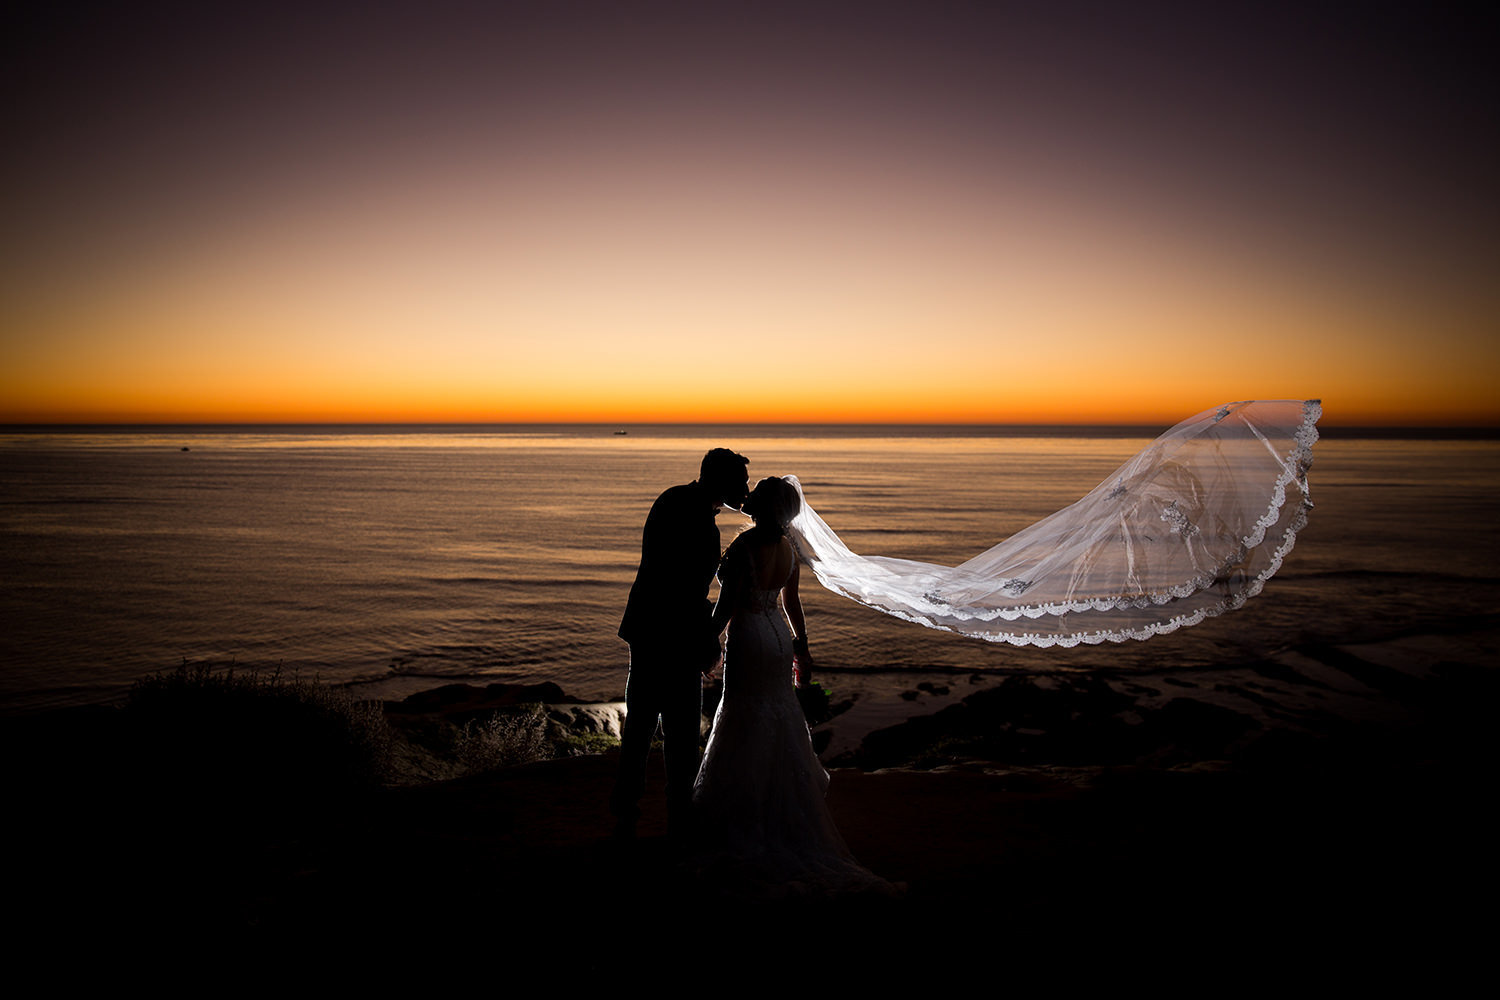 stunning sunset image with long veil on bride